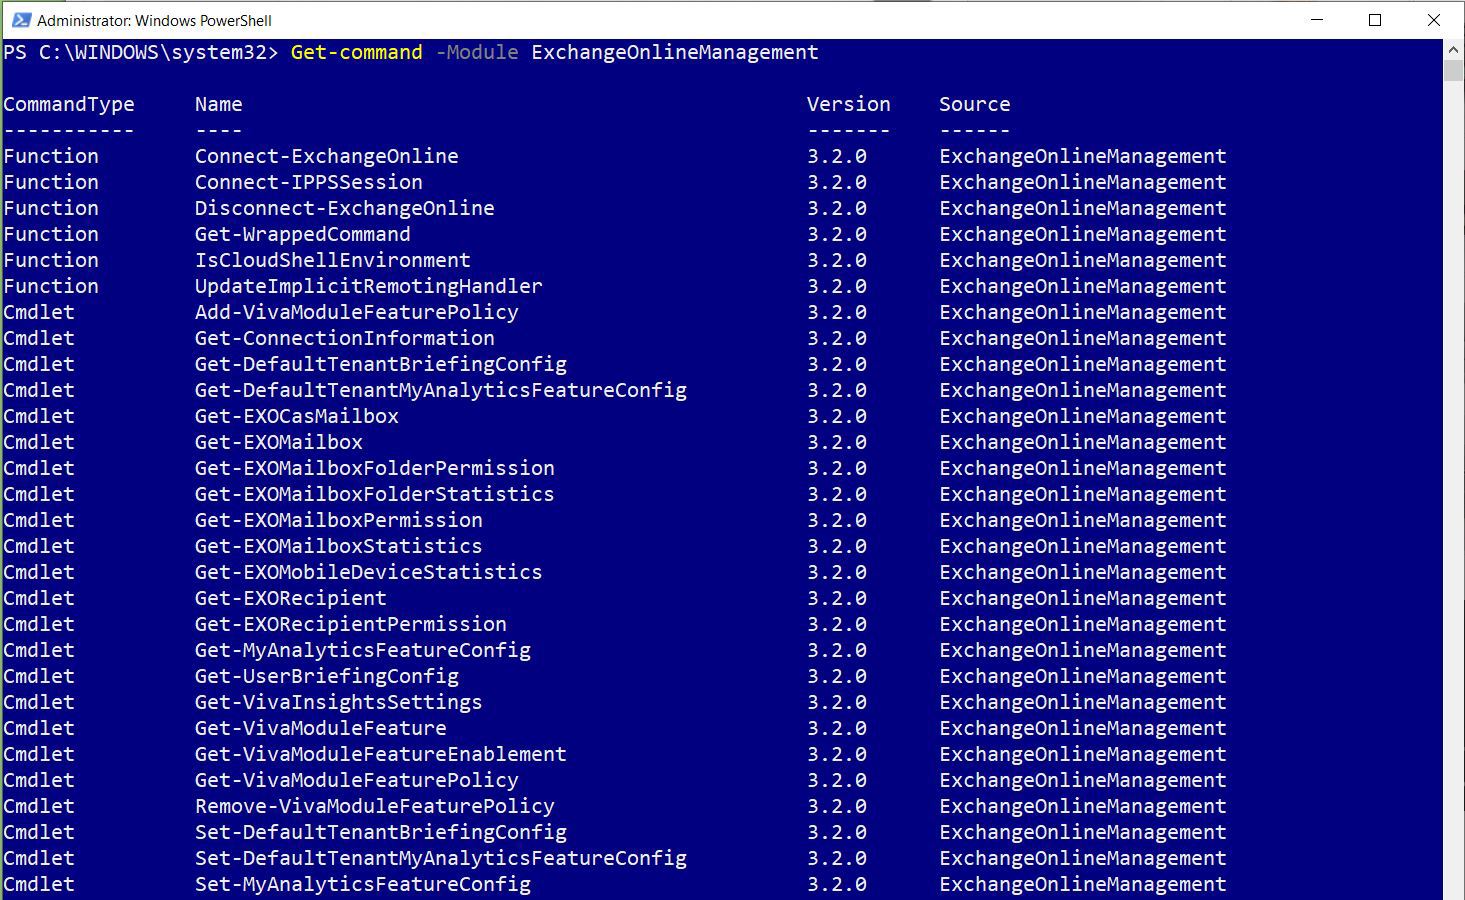 This screenshot shows the PowerShell command for listing all the cmdlets associated with the exchange online management module.